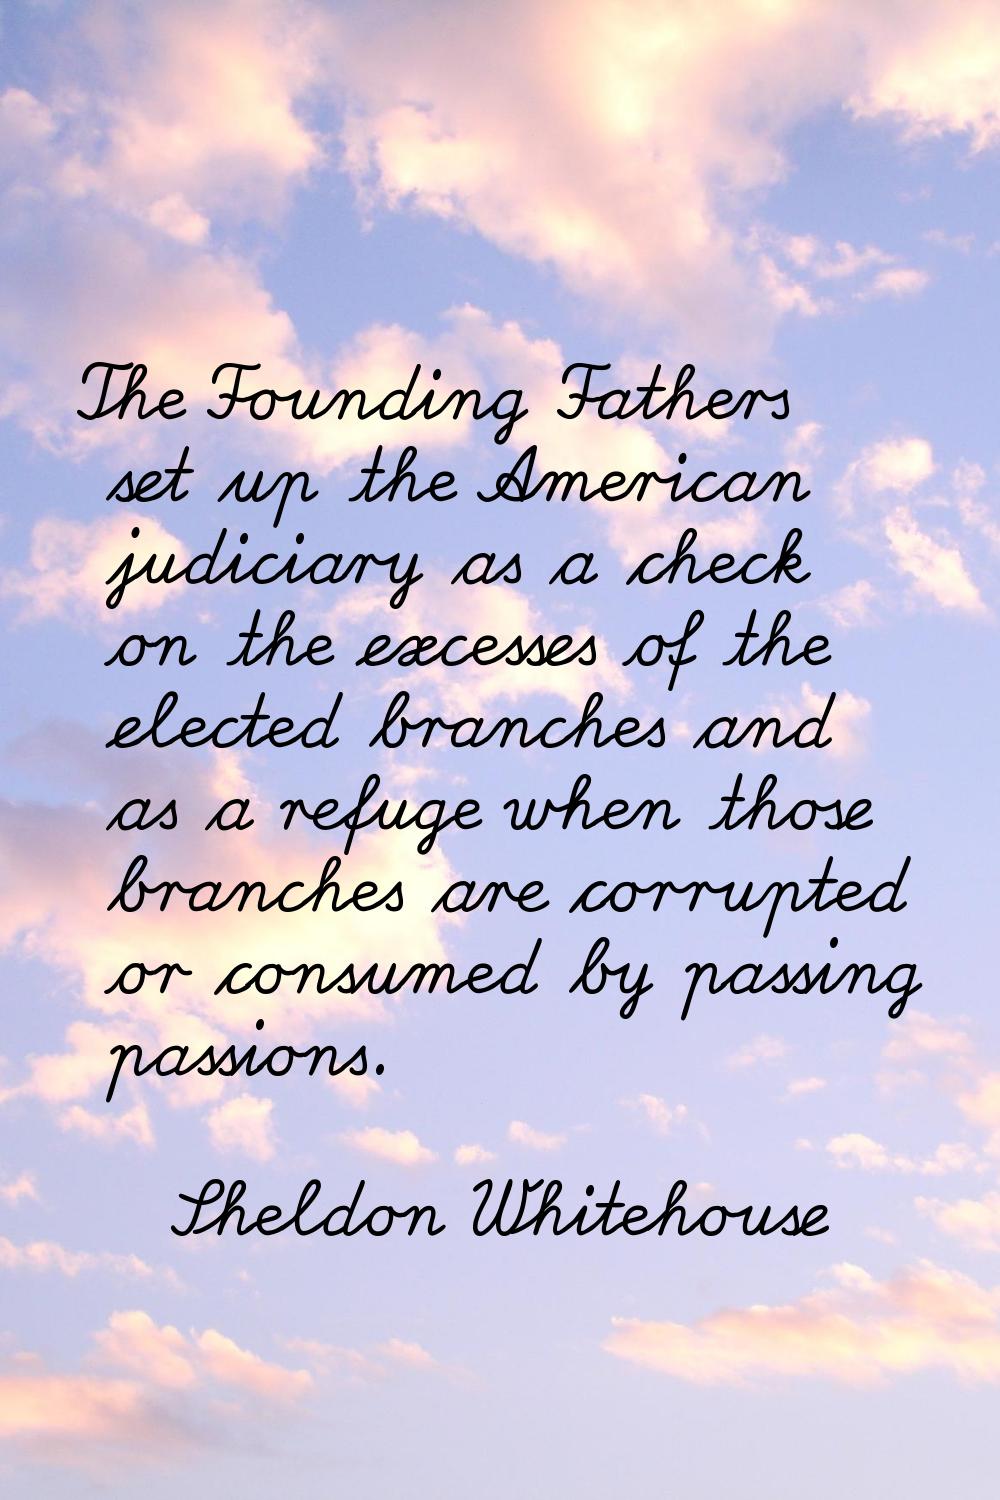 The Founding Fathers set up the American judiciary as a check on the excesses of the elected branch